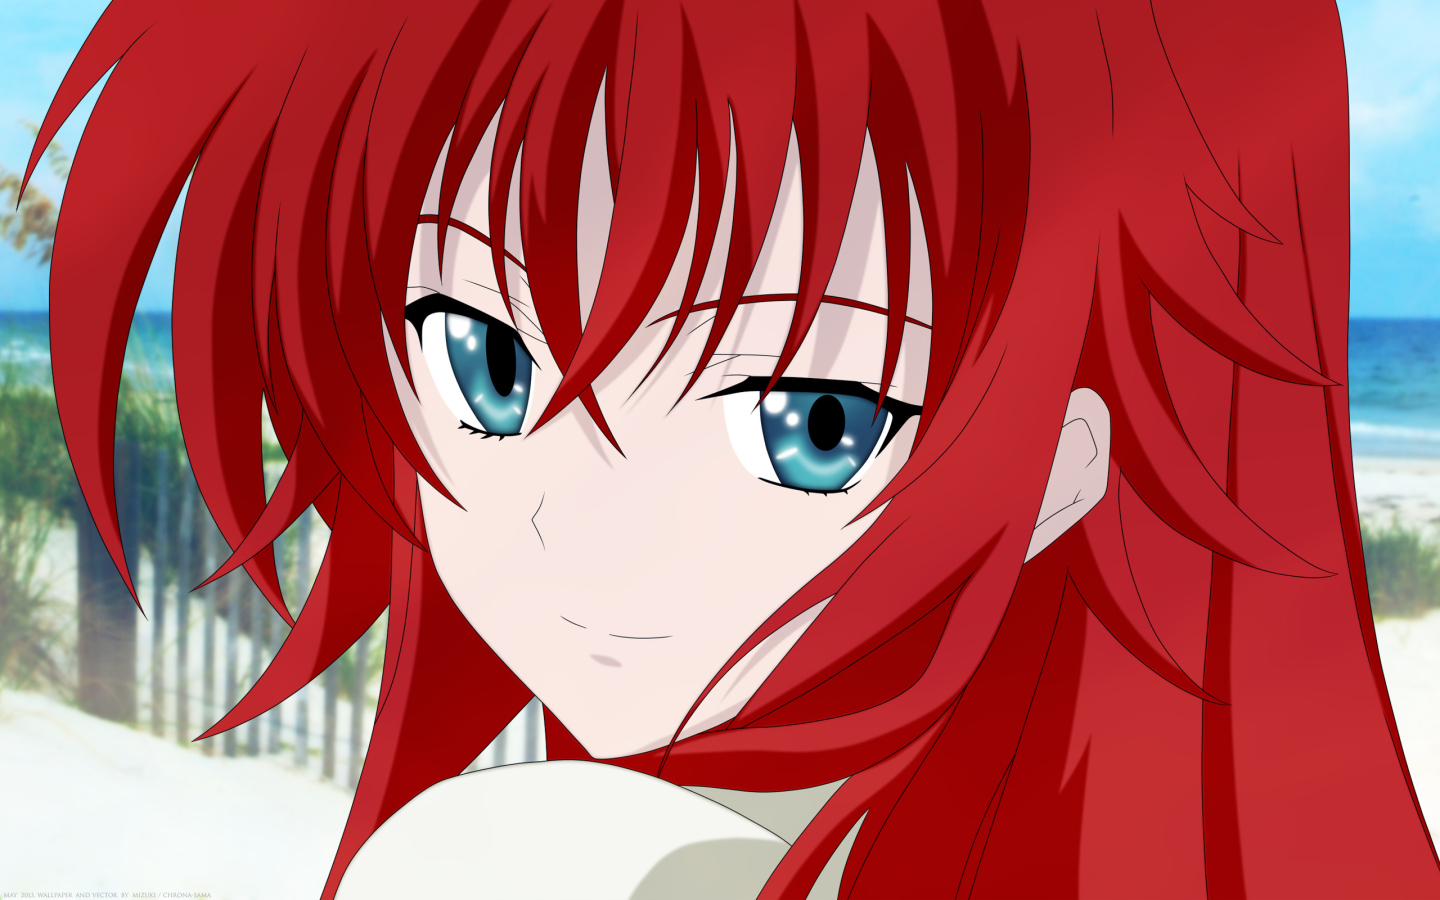 1440x900 Highschool Dxd Rias Gremory Girl 1440x900 Wallpaper Hd Anime 4k Wallpapers Images Photos And Background